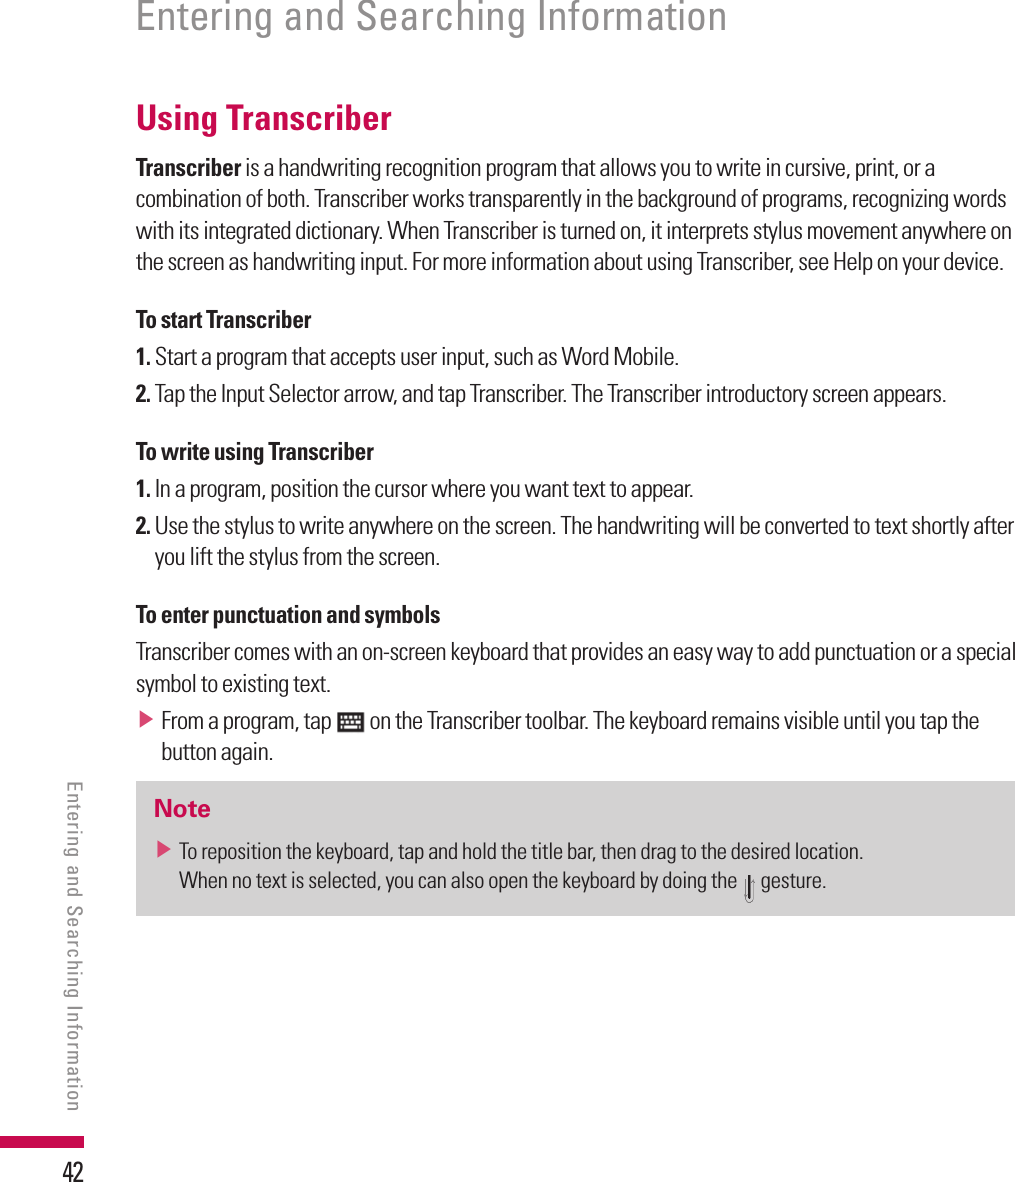 42Using TranscriberTranscriber is a handwriting recognition program that allows you to write in cursive, print, or a combination of both. Transcriber works transparently in the background of programs, recognizing words with its integrated dictionary. When Transcriber is turned on, it interprets stylus movement anywhere on the screen as handwriting input. For more information about using Transcriber, see Help on your device.To start Transcriber1.  Start a program that accepts user input, such as Word Mobile.2.  Tap the Input Selector arrow, and tap Transcriber. The Transcriber introductory screen appears.To write using Transcriber1.  In a program, position the cursor where you want text to appear.2.  Use the stylus to write anywhere on the screen. The handwriting will be converted to text shortly after you lift the stylus from the screen.To enter punctuation and symbolsTranscriber comes with an on-screen keyboard that provides an easy way to add punctuation or a special symbol to existing text.v  From a program, tap   on the Transcriber toolbar. The keyboard remains visible until you tap the button again.Notev  To reposition the keyboard, tap and hold the title bar, then drag to the desired location.When no text is selected, you can also open the keyboard by doing the   gesture.Entering and Searching InformationEntering and Searching Information